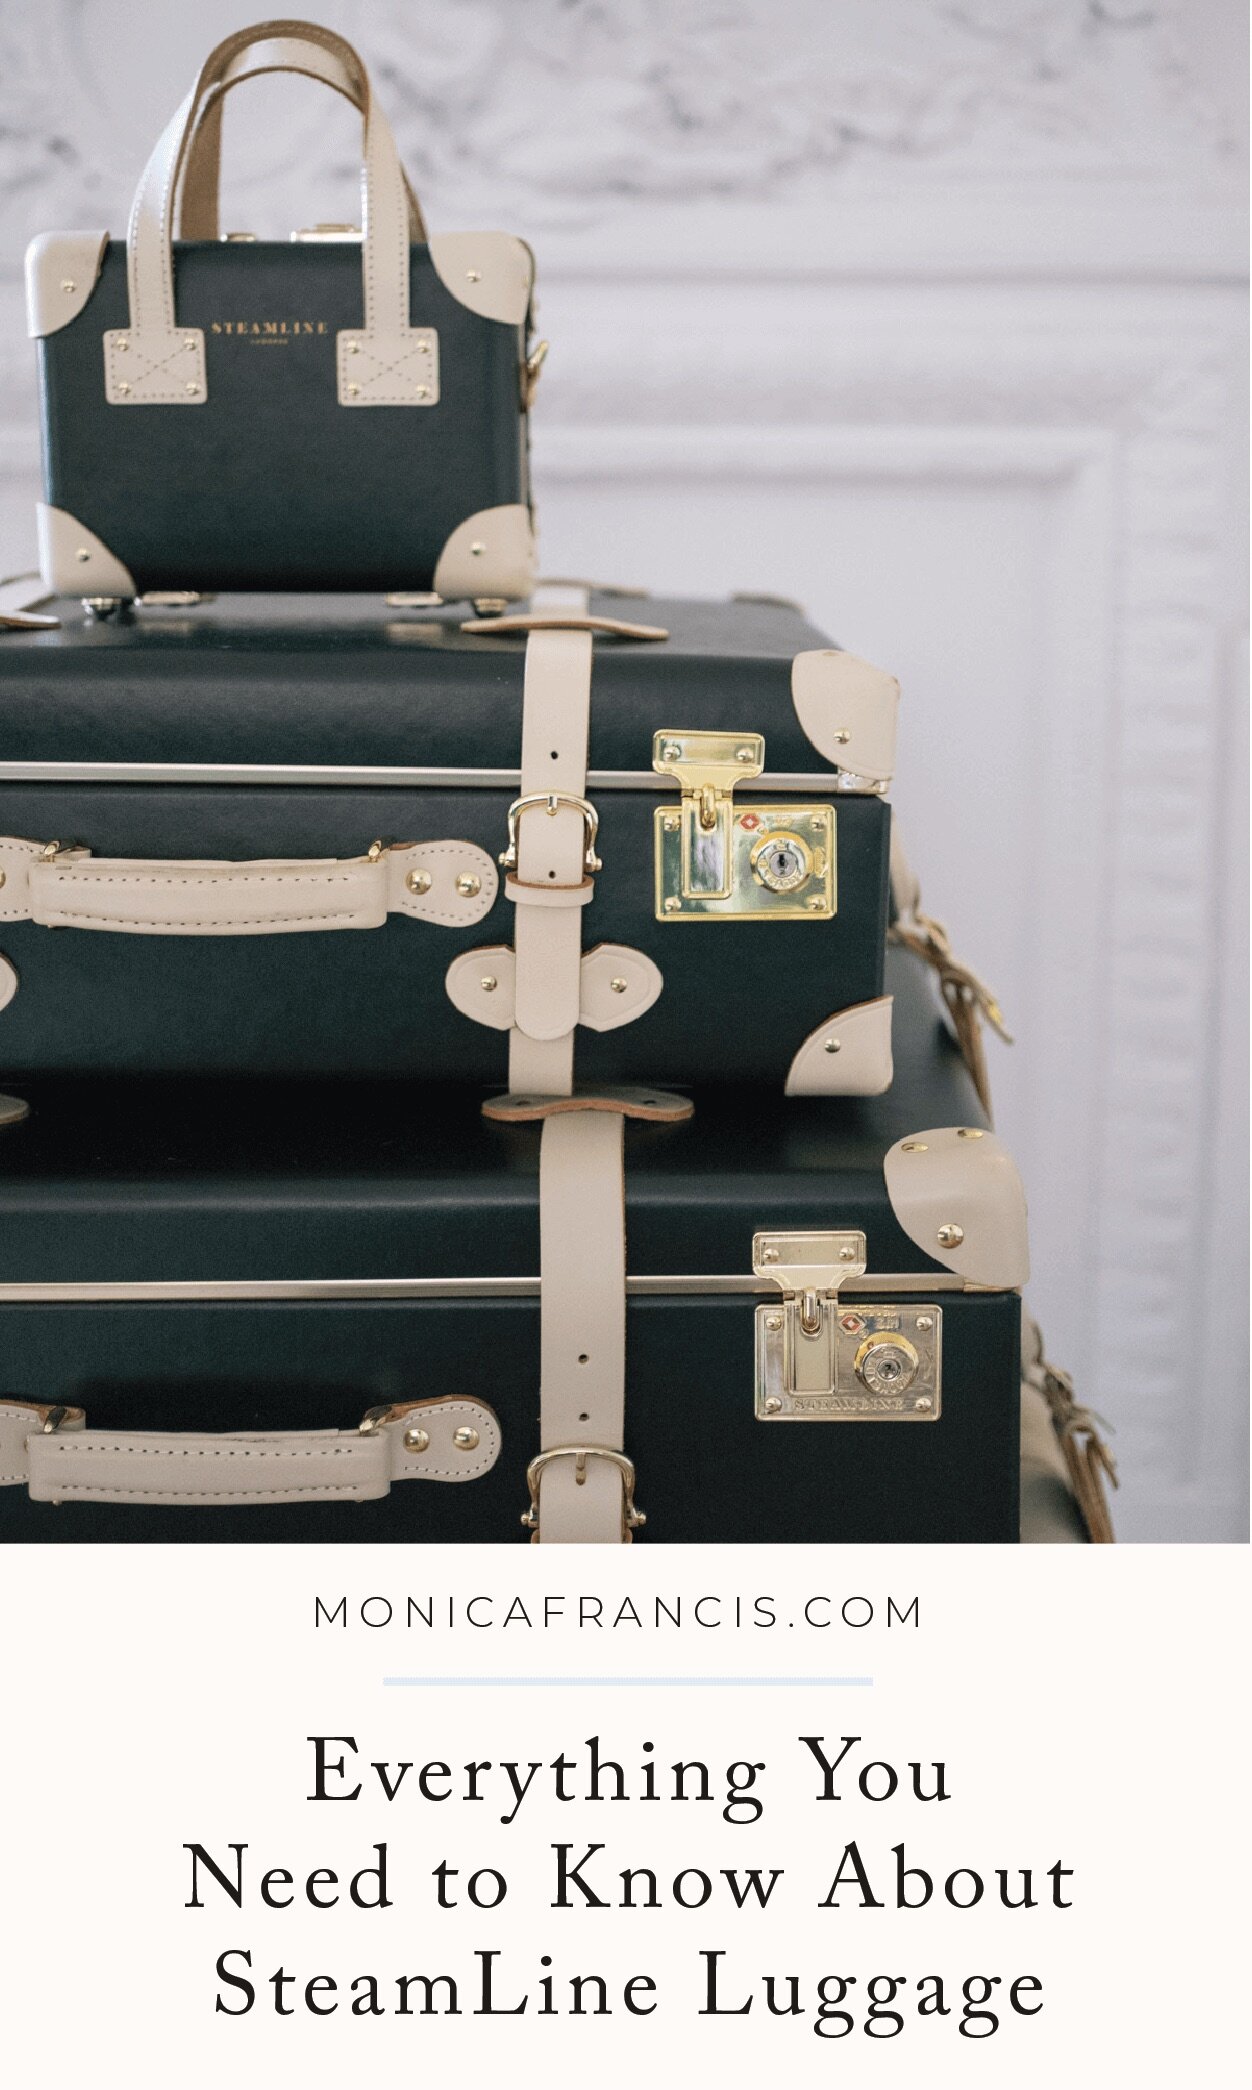 Everything You Need To Know About SteamLine Luggage | After traveling with the SteamLine Luggage Starlet set for a few years, I’m answering all the questions you’ve asked. The quality of the suitcases, how to take care of them,   which size is best,…